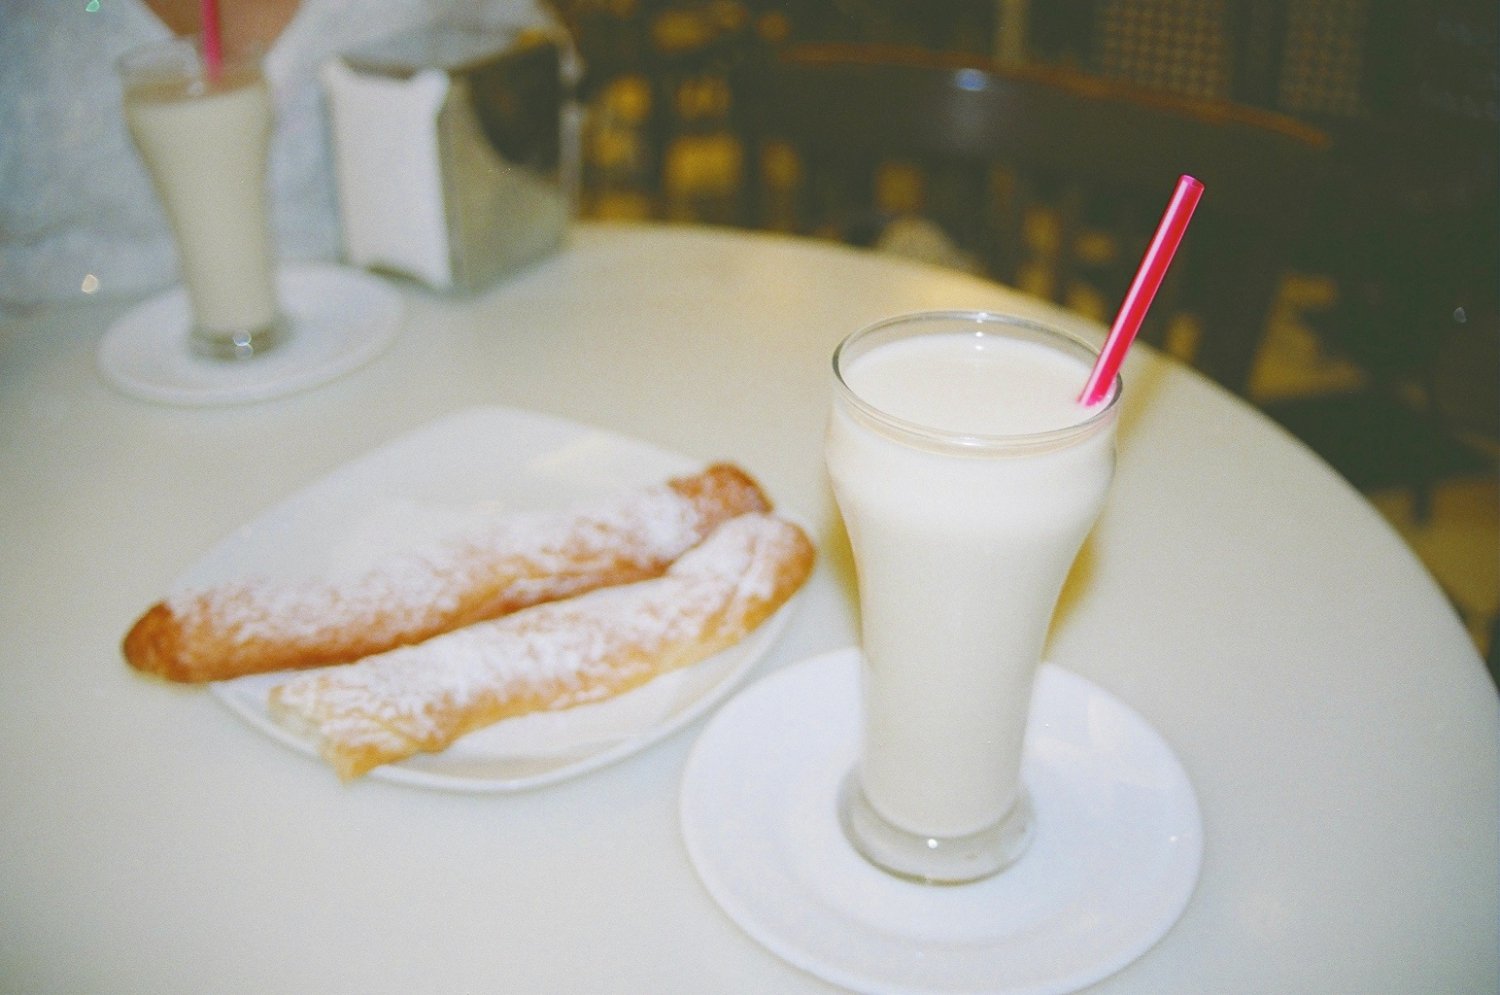 We're going nuts over horchata